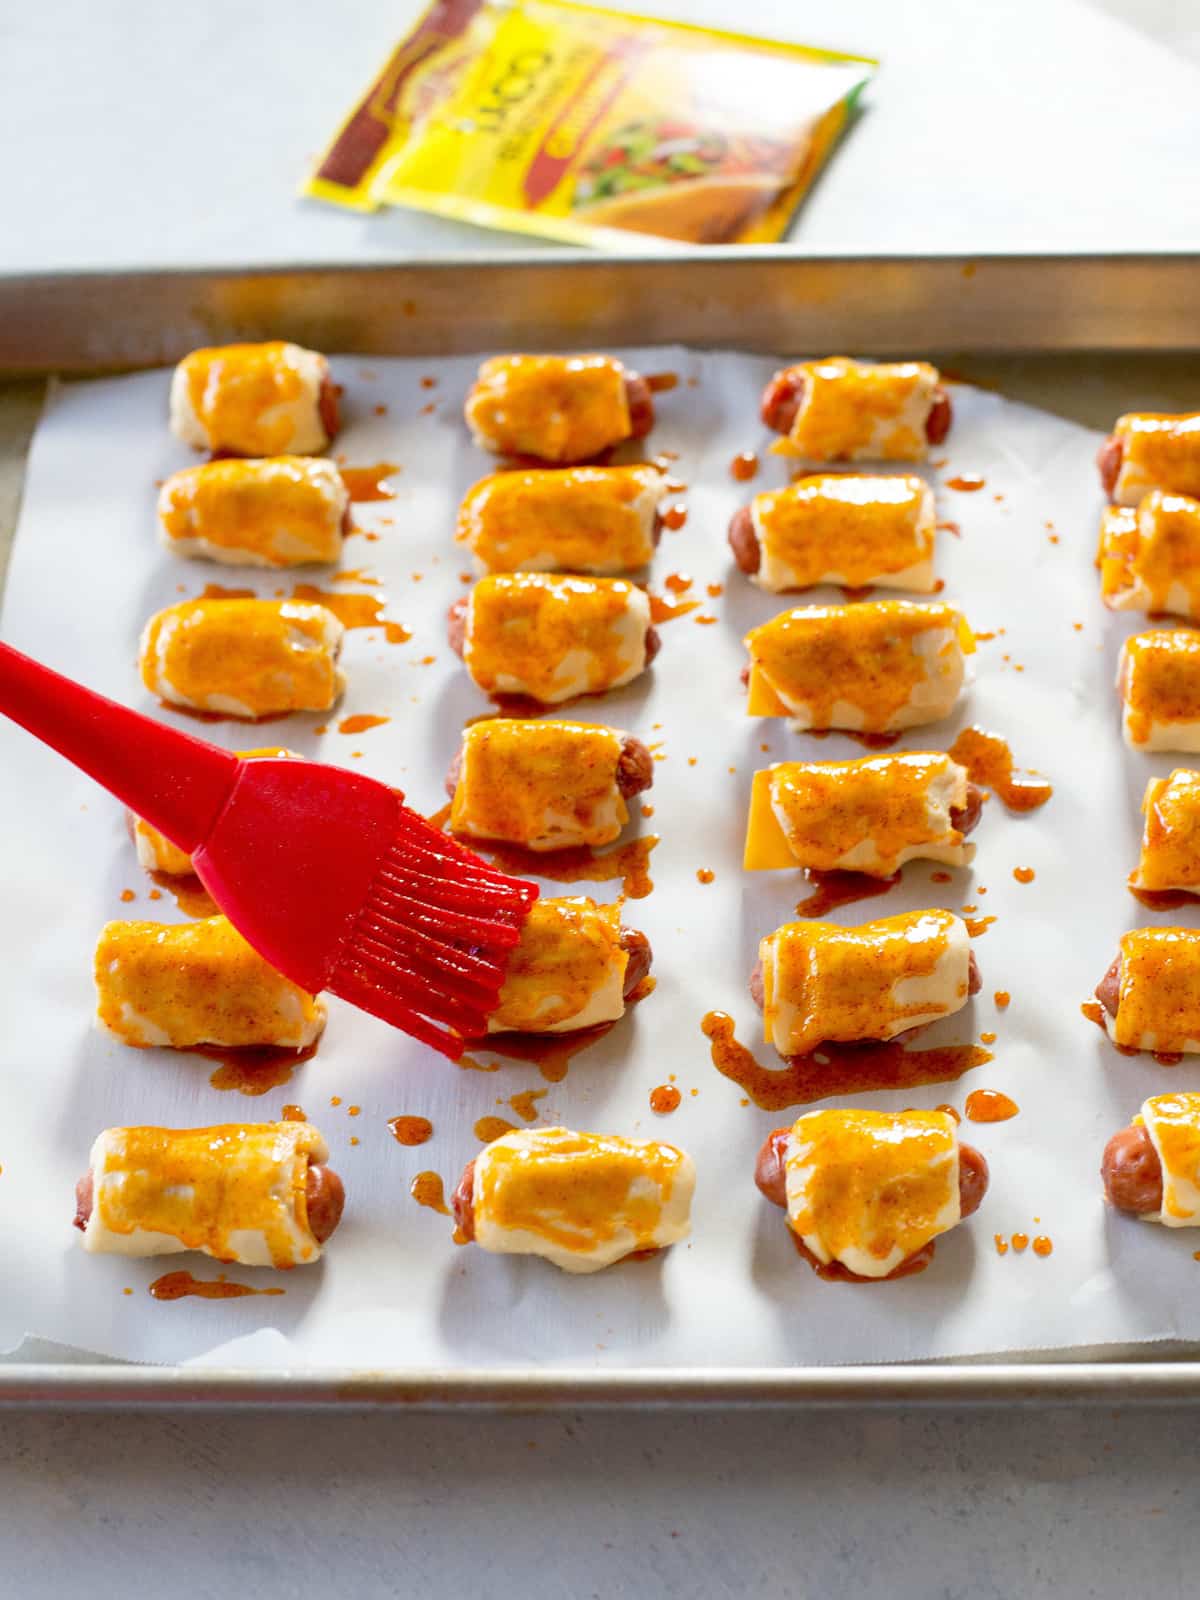 Taco Pigs in a Blanket - a Mexican twist on the classic appetizer. Make a toppings bar so everyone can top their own. the-girl-who-ate-everything.com